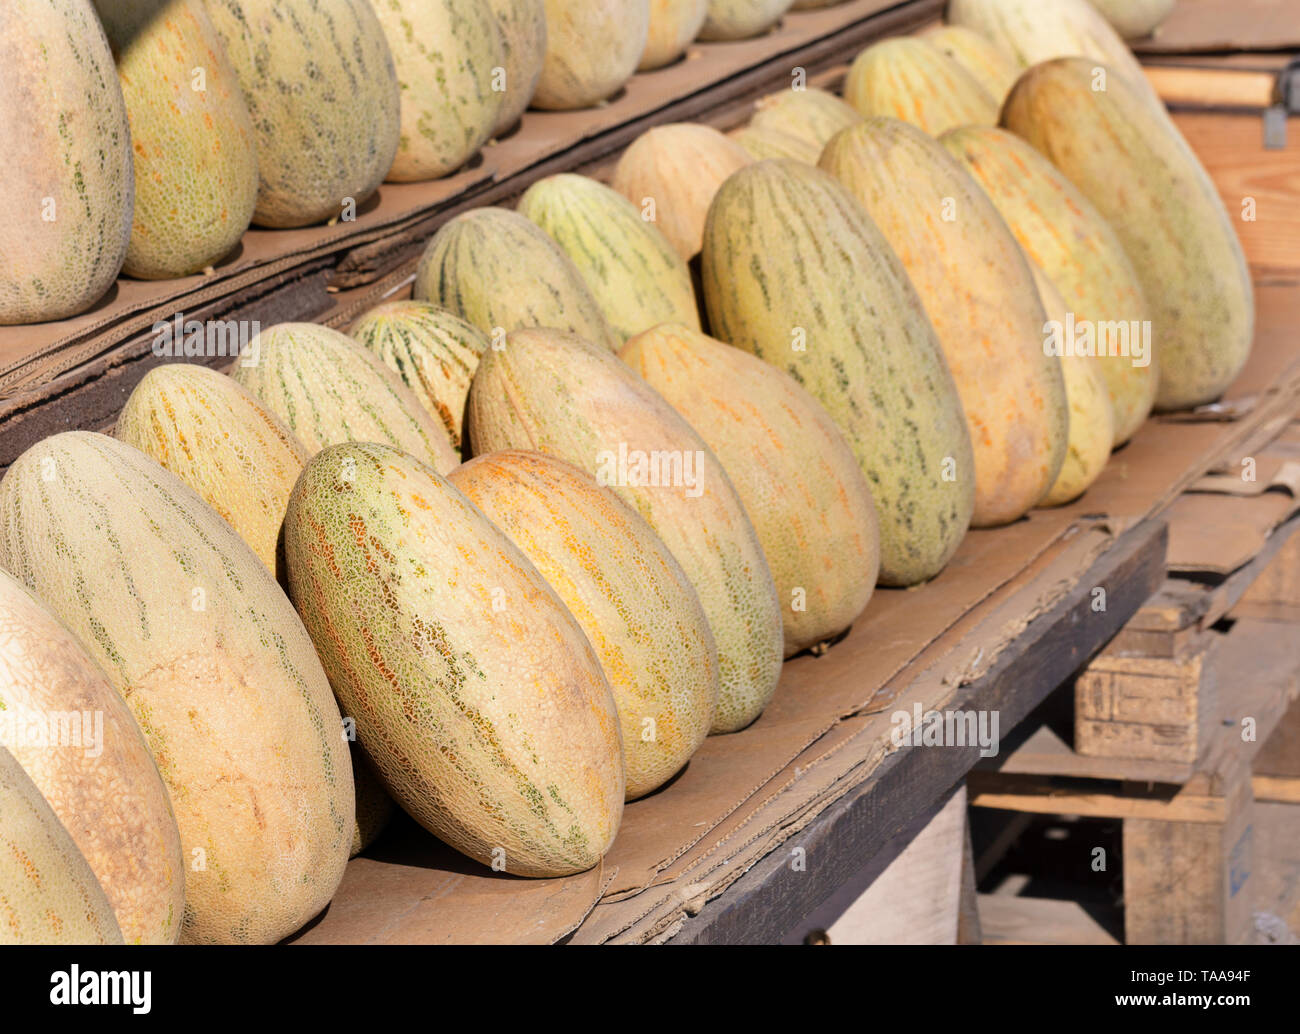 A heap of ripe yellow melons lie on wooden pallets and are sold on the market Stock Photo